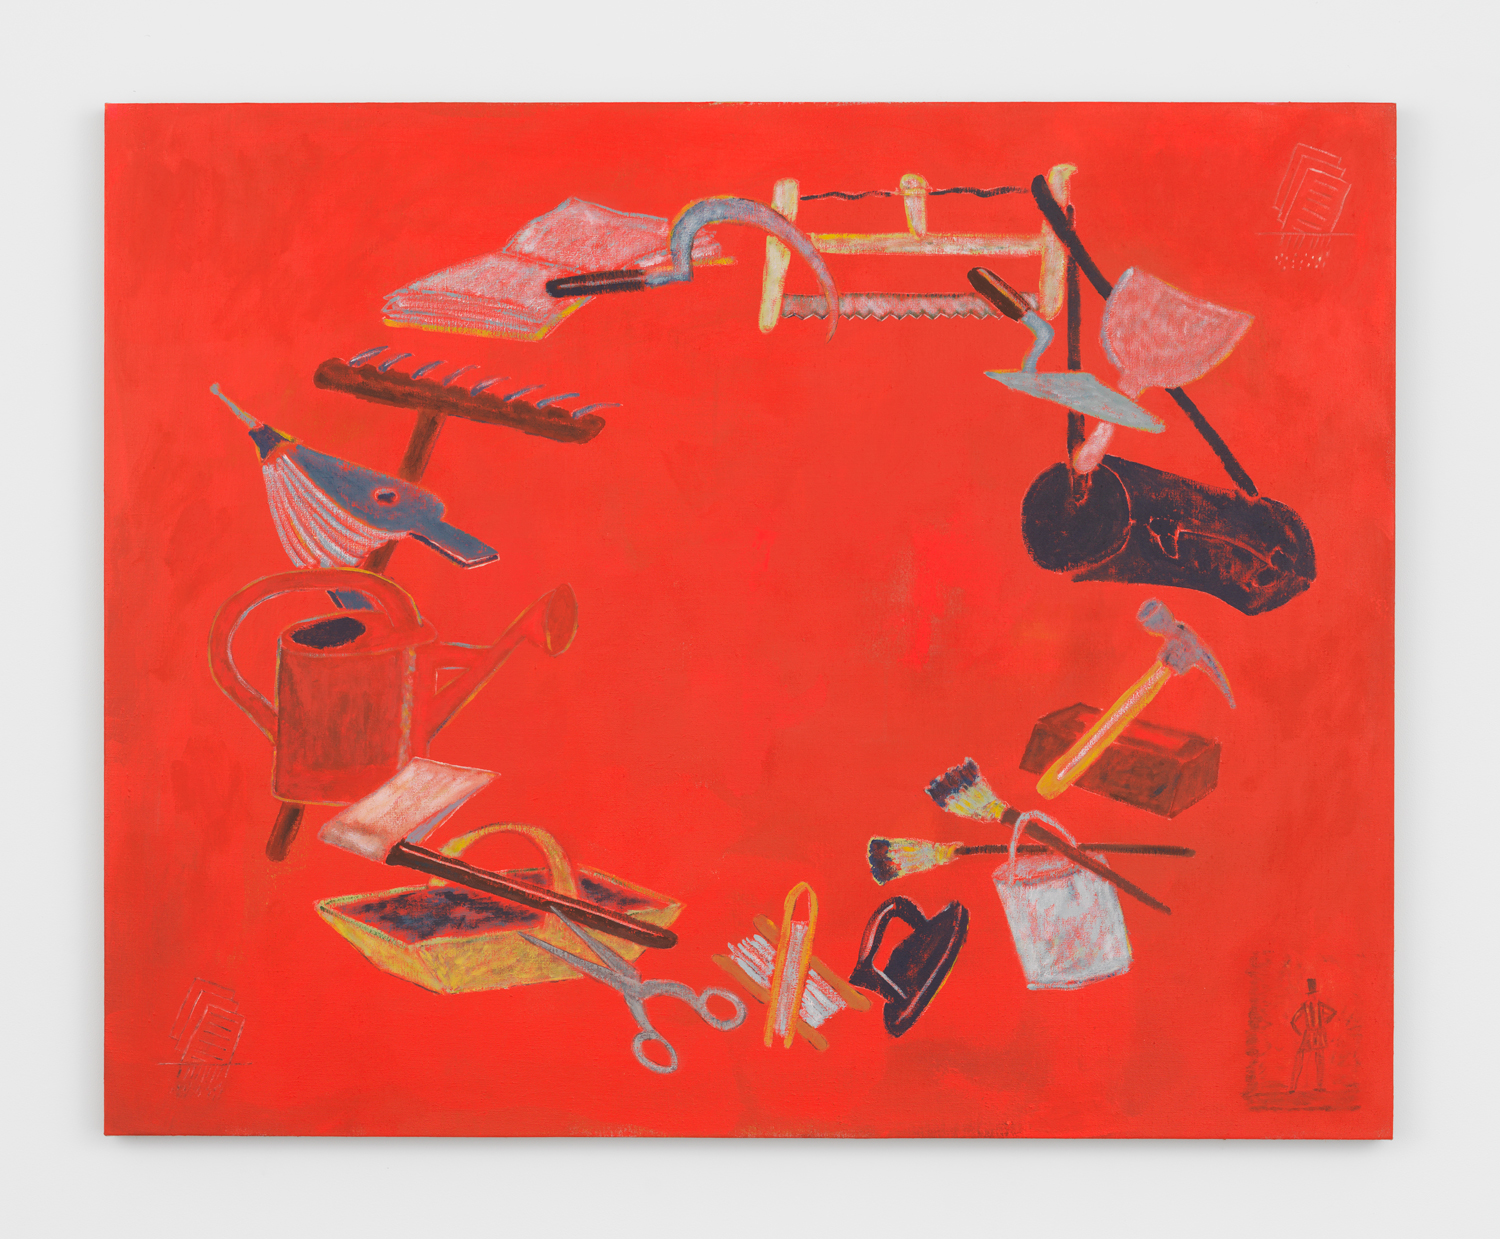 Zach Bruder, Material Supply (Homage to M.S.), 2020, Acrylic and Flashe on linen, 40h x 50w in.